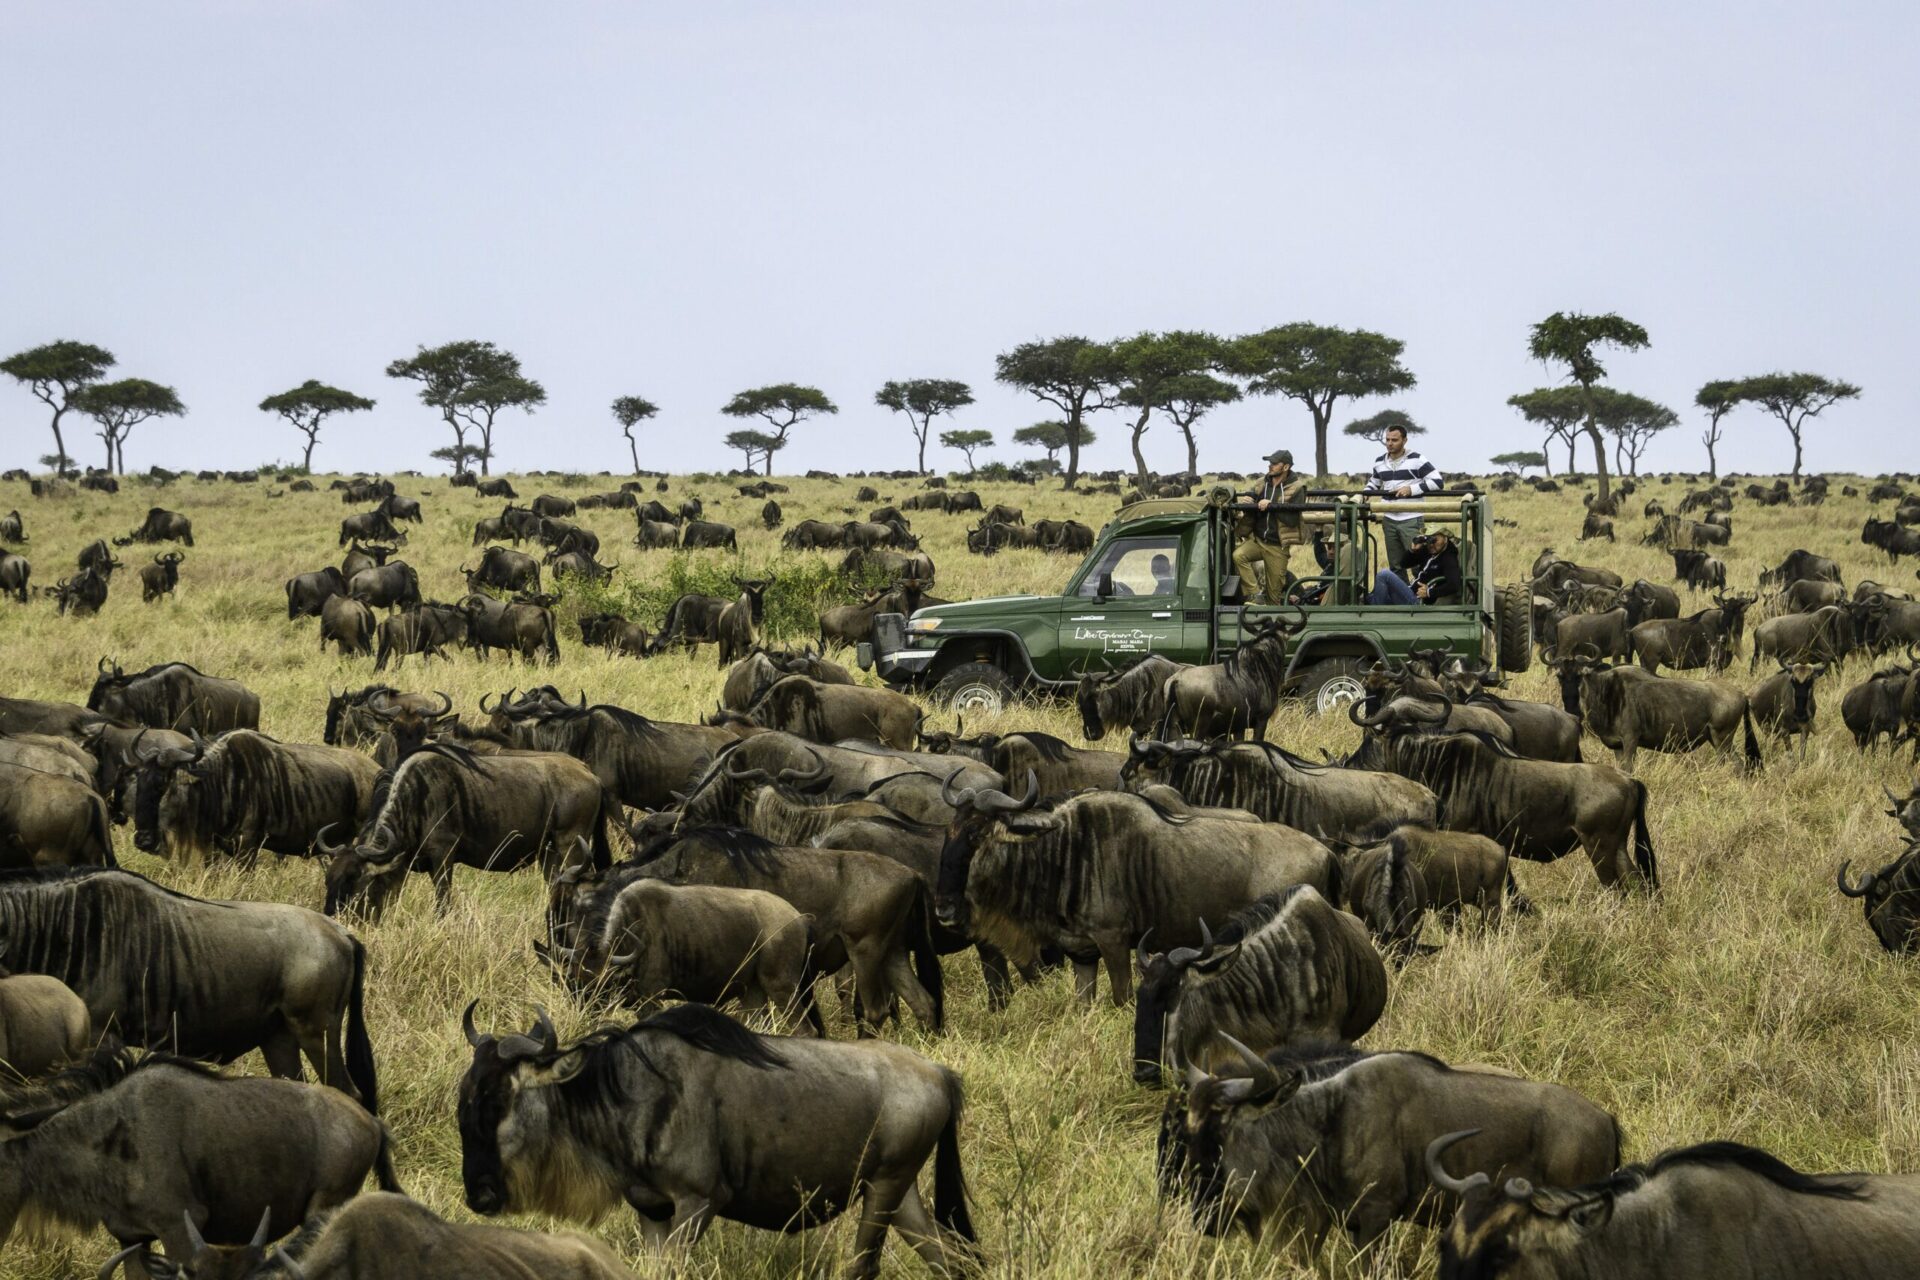 wildebeest on the open plains surrounding a safari vehicle in Kenya on this Southern Africa safari